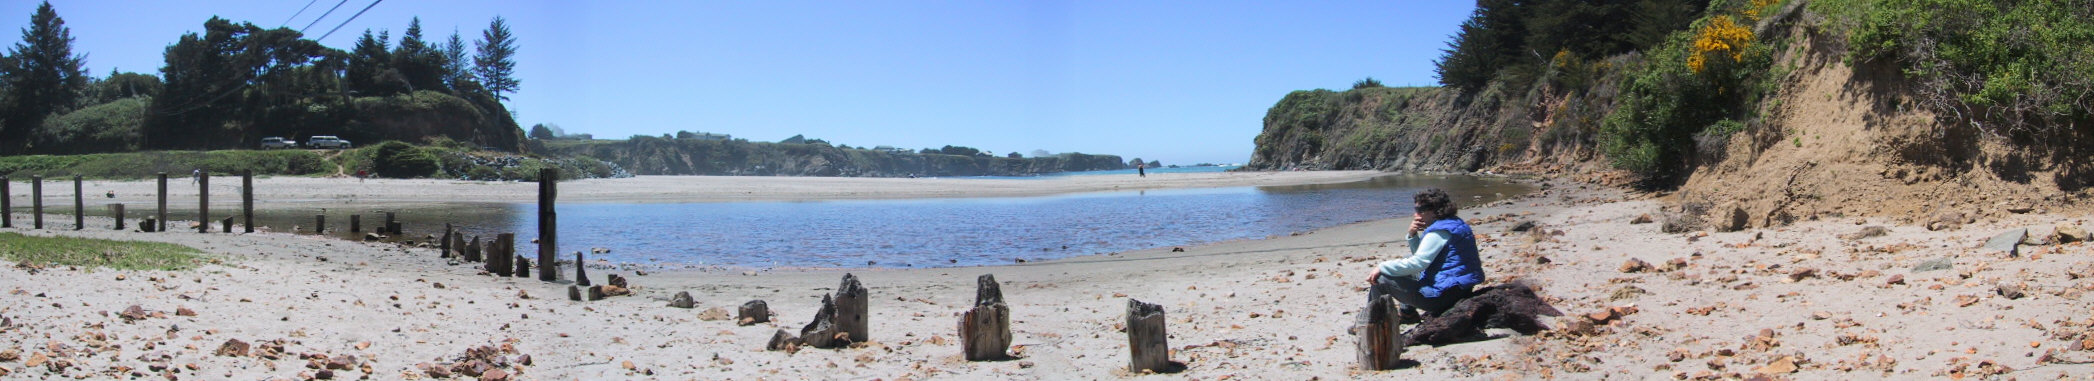 Caspar beach from the old mill site